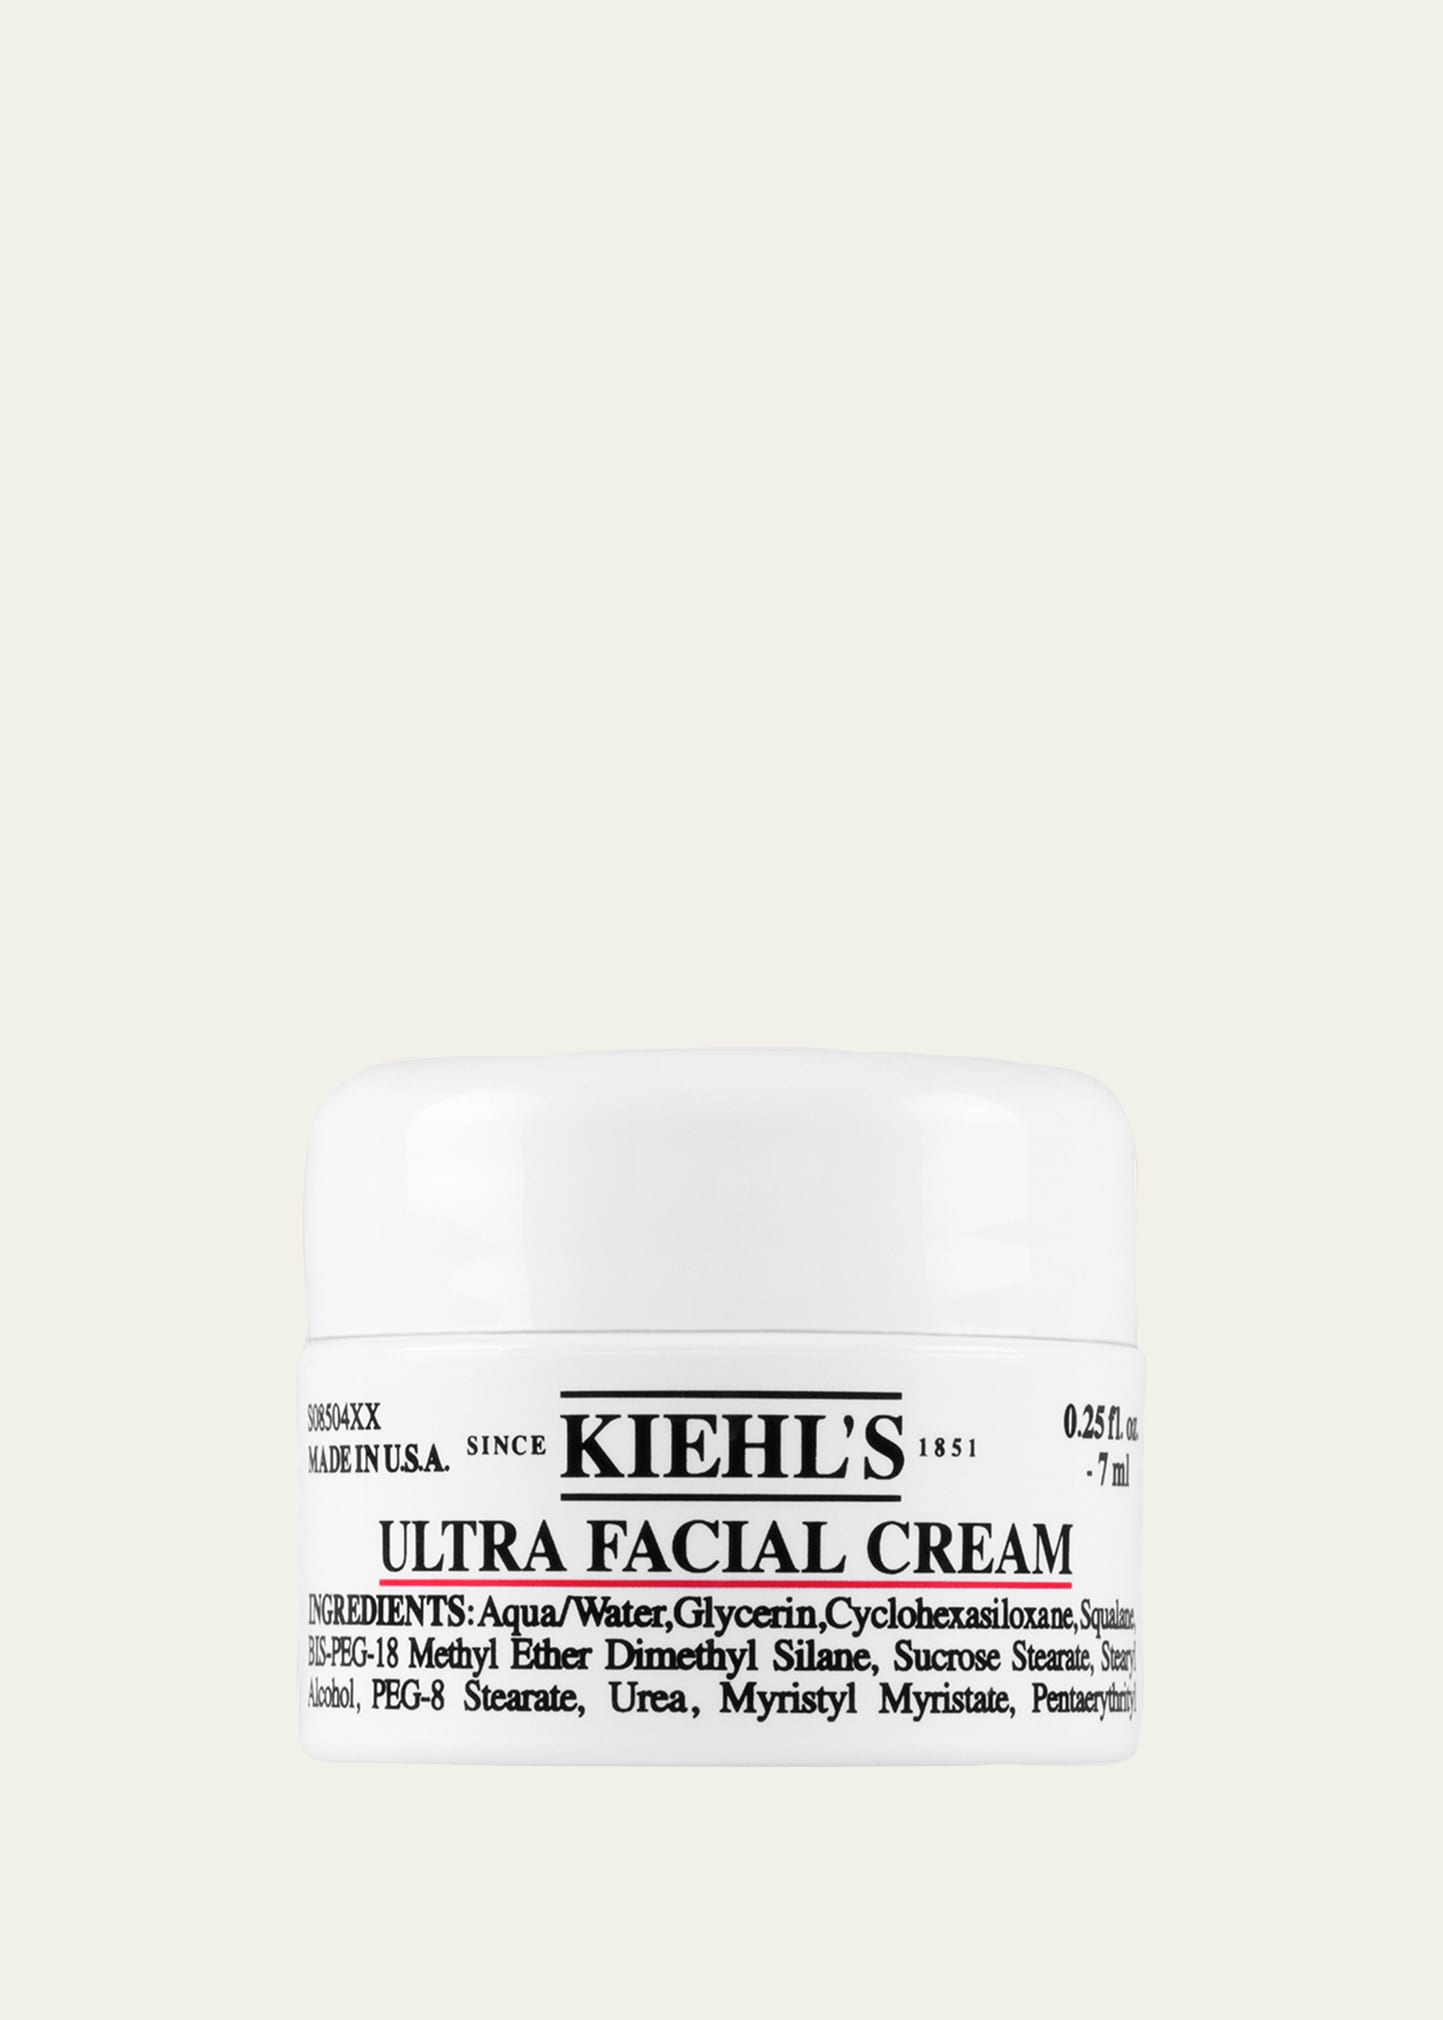 Ultra Facial Cream, Yours with any $50 Kiehl's Beauty Purchase